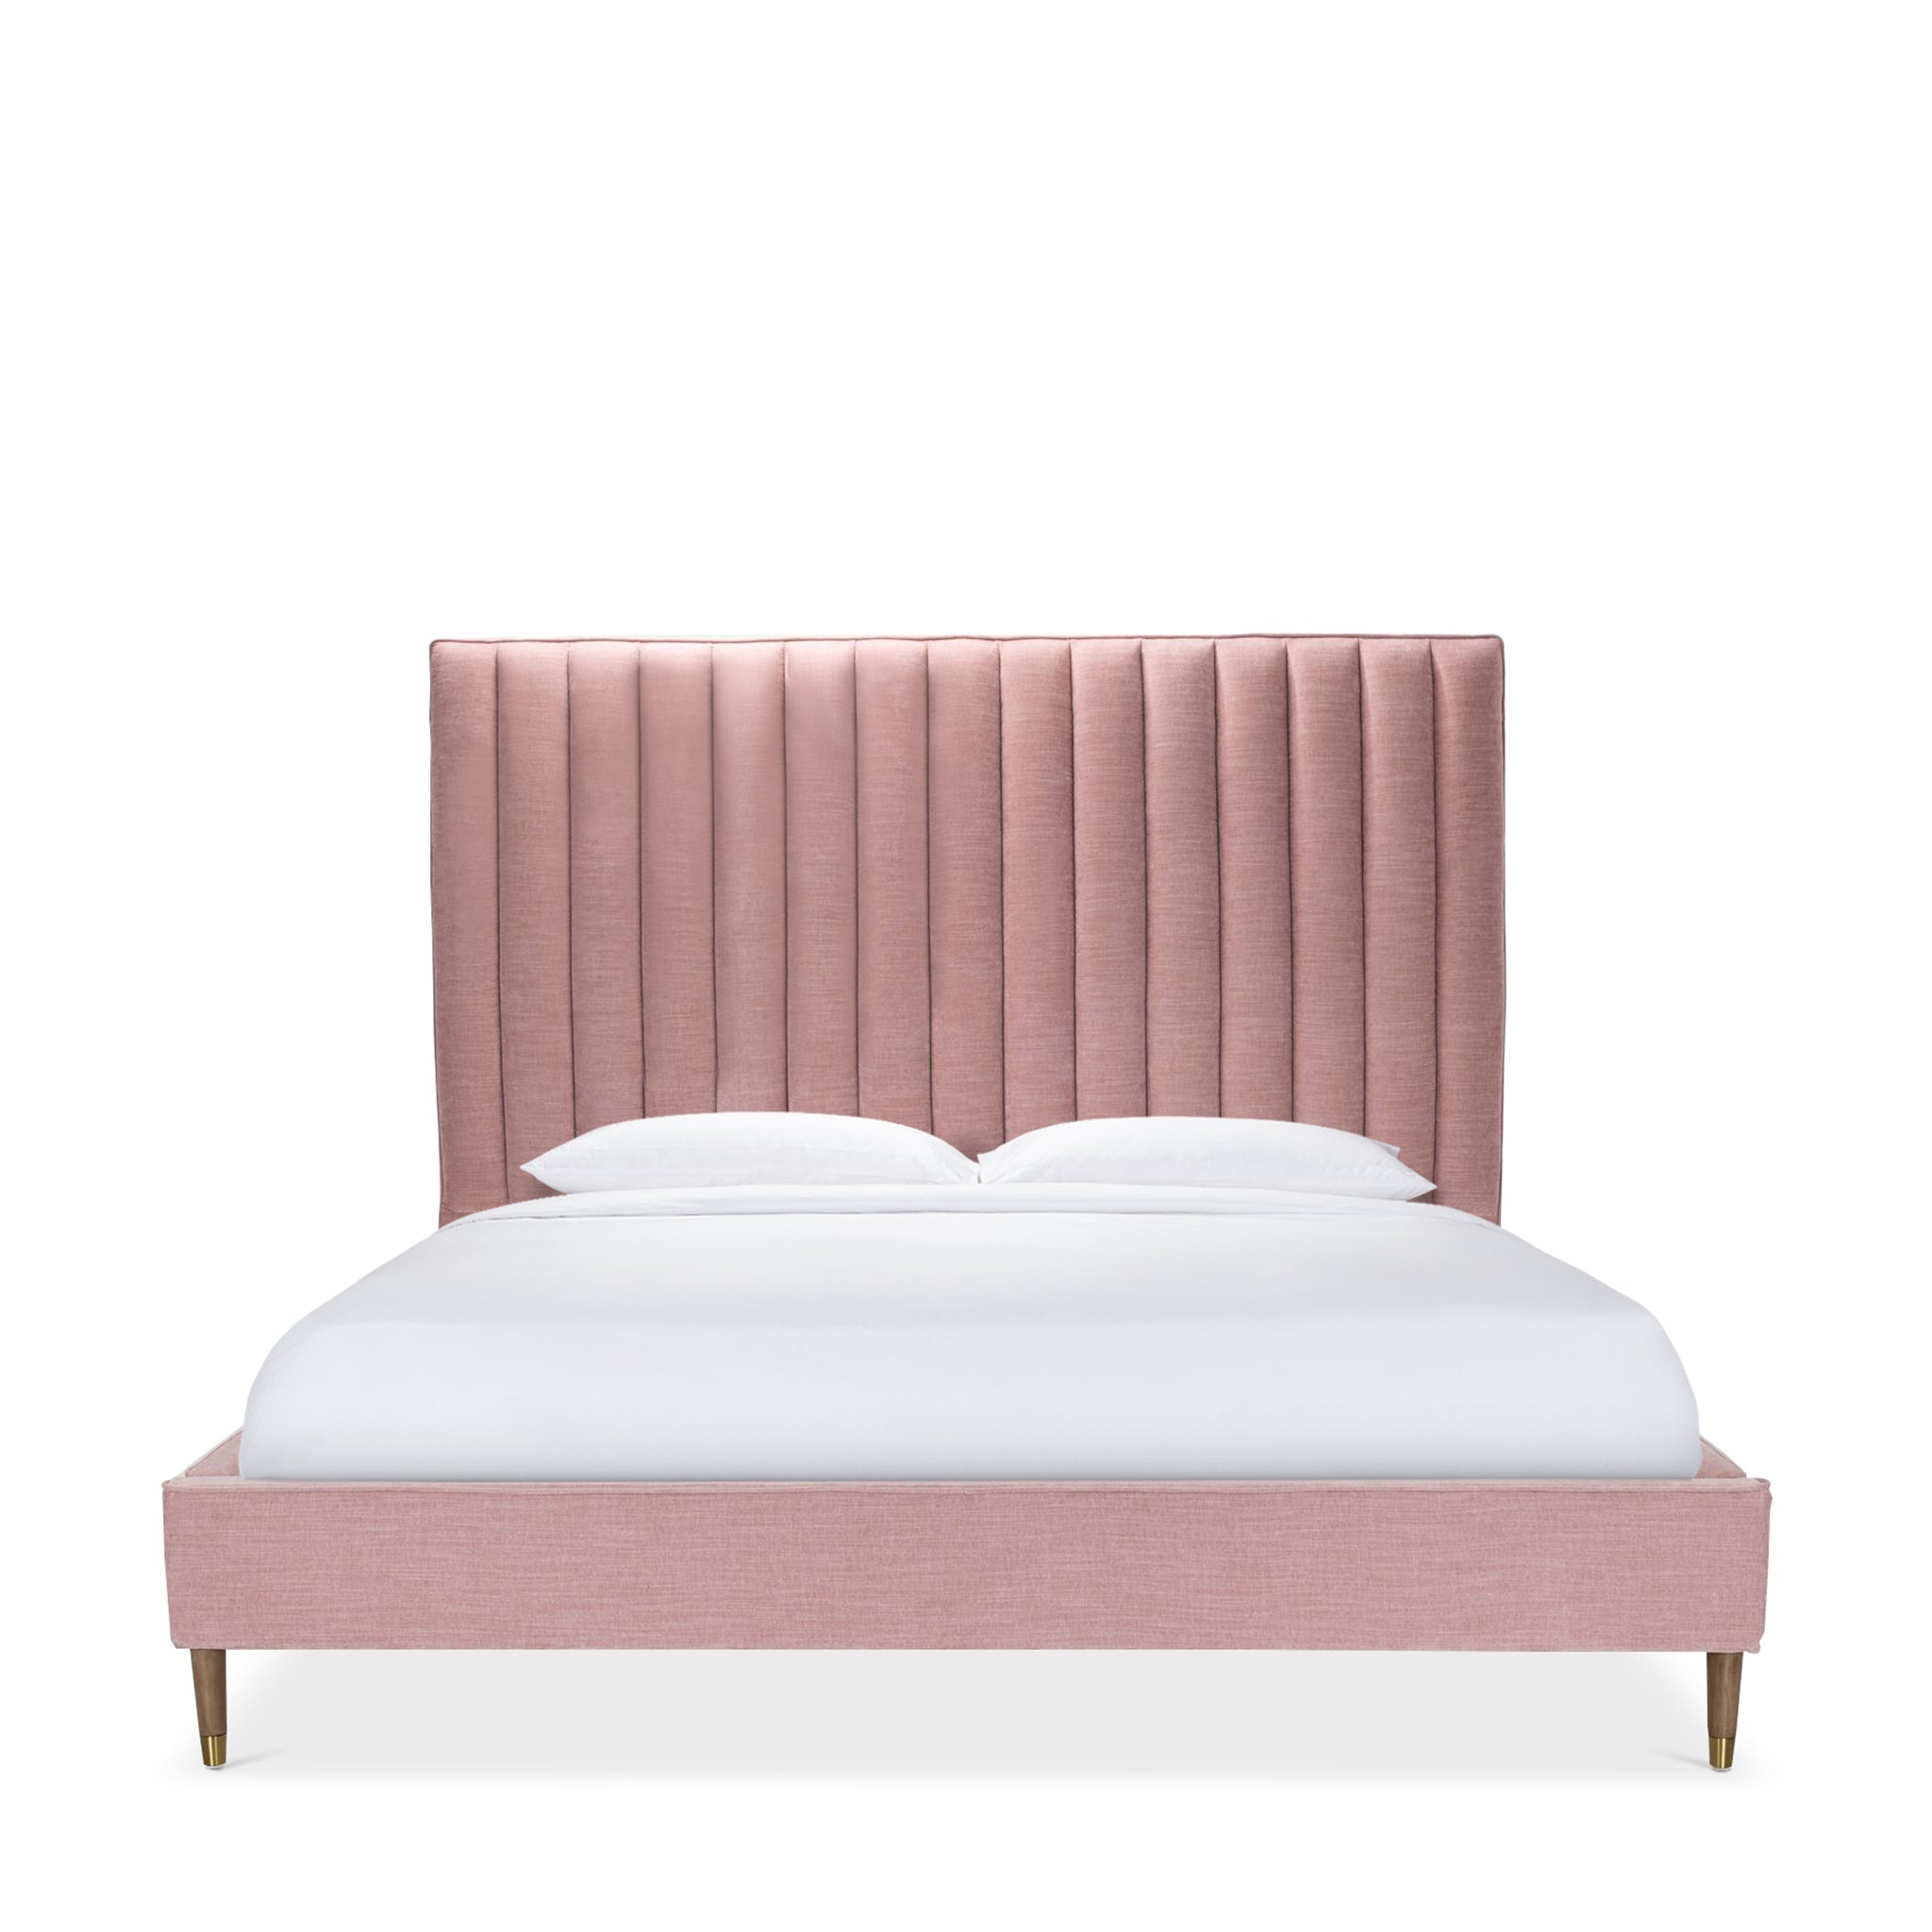 FRAMER FRENCH PINK US QUEEN SIZE BED